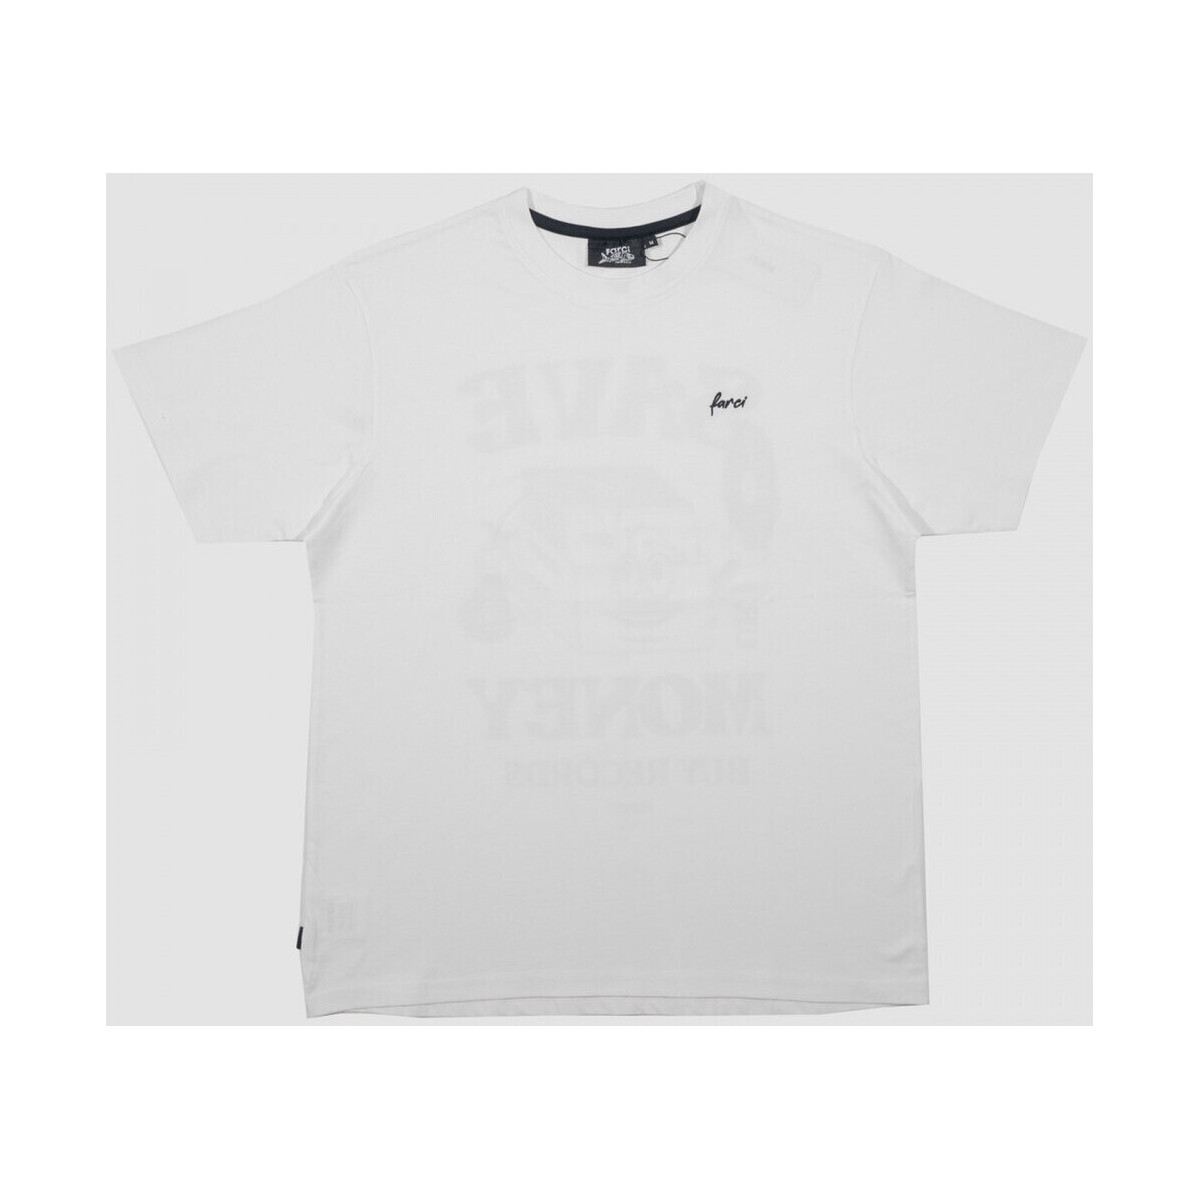 Vêtements Homme T-shirts & Polos Farci Tee we are Blanc